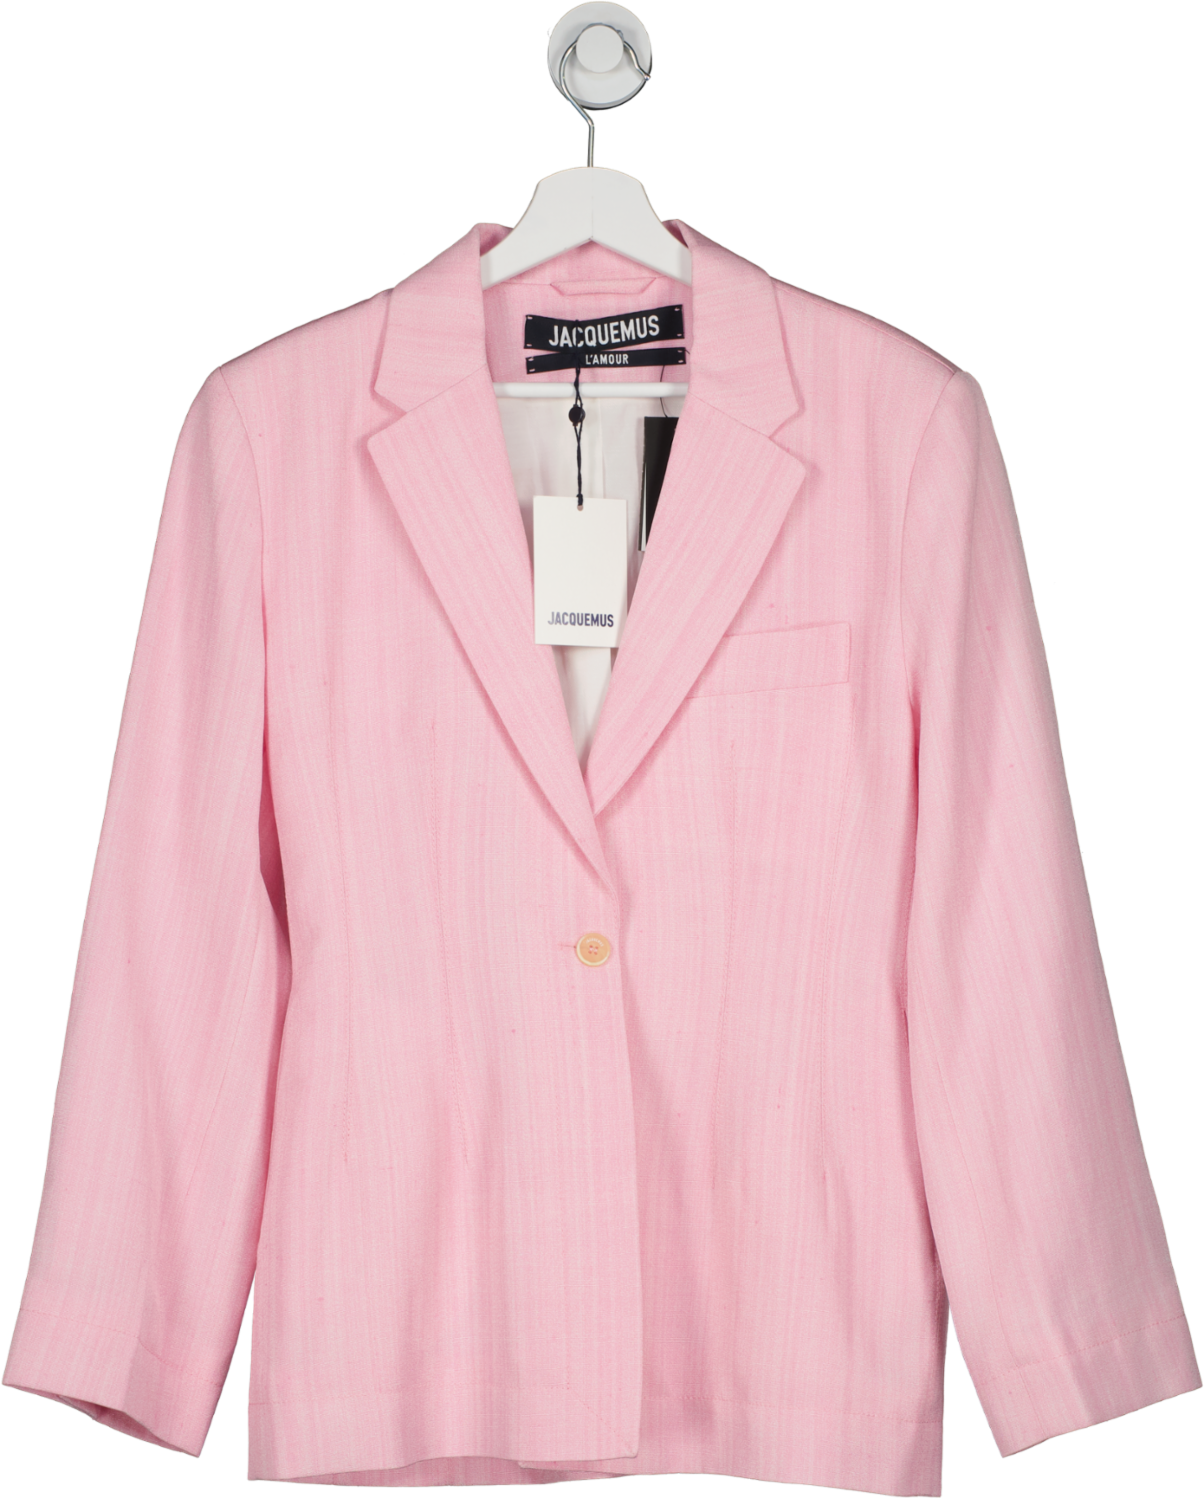 JACQUEMUS L’Amour Single Breasted Light Pink Blazer UK 10